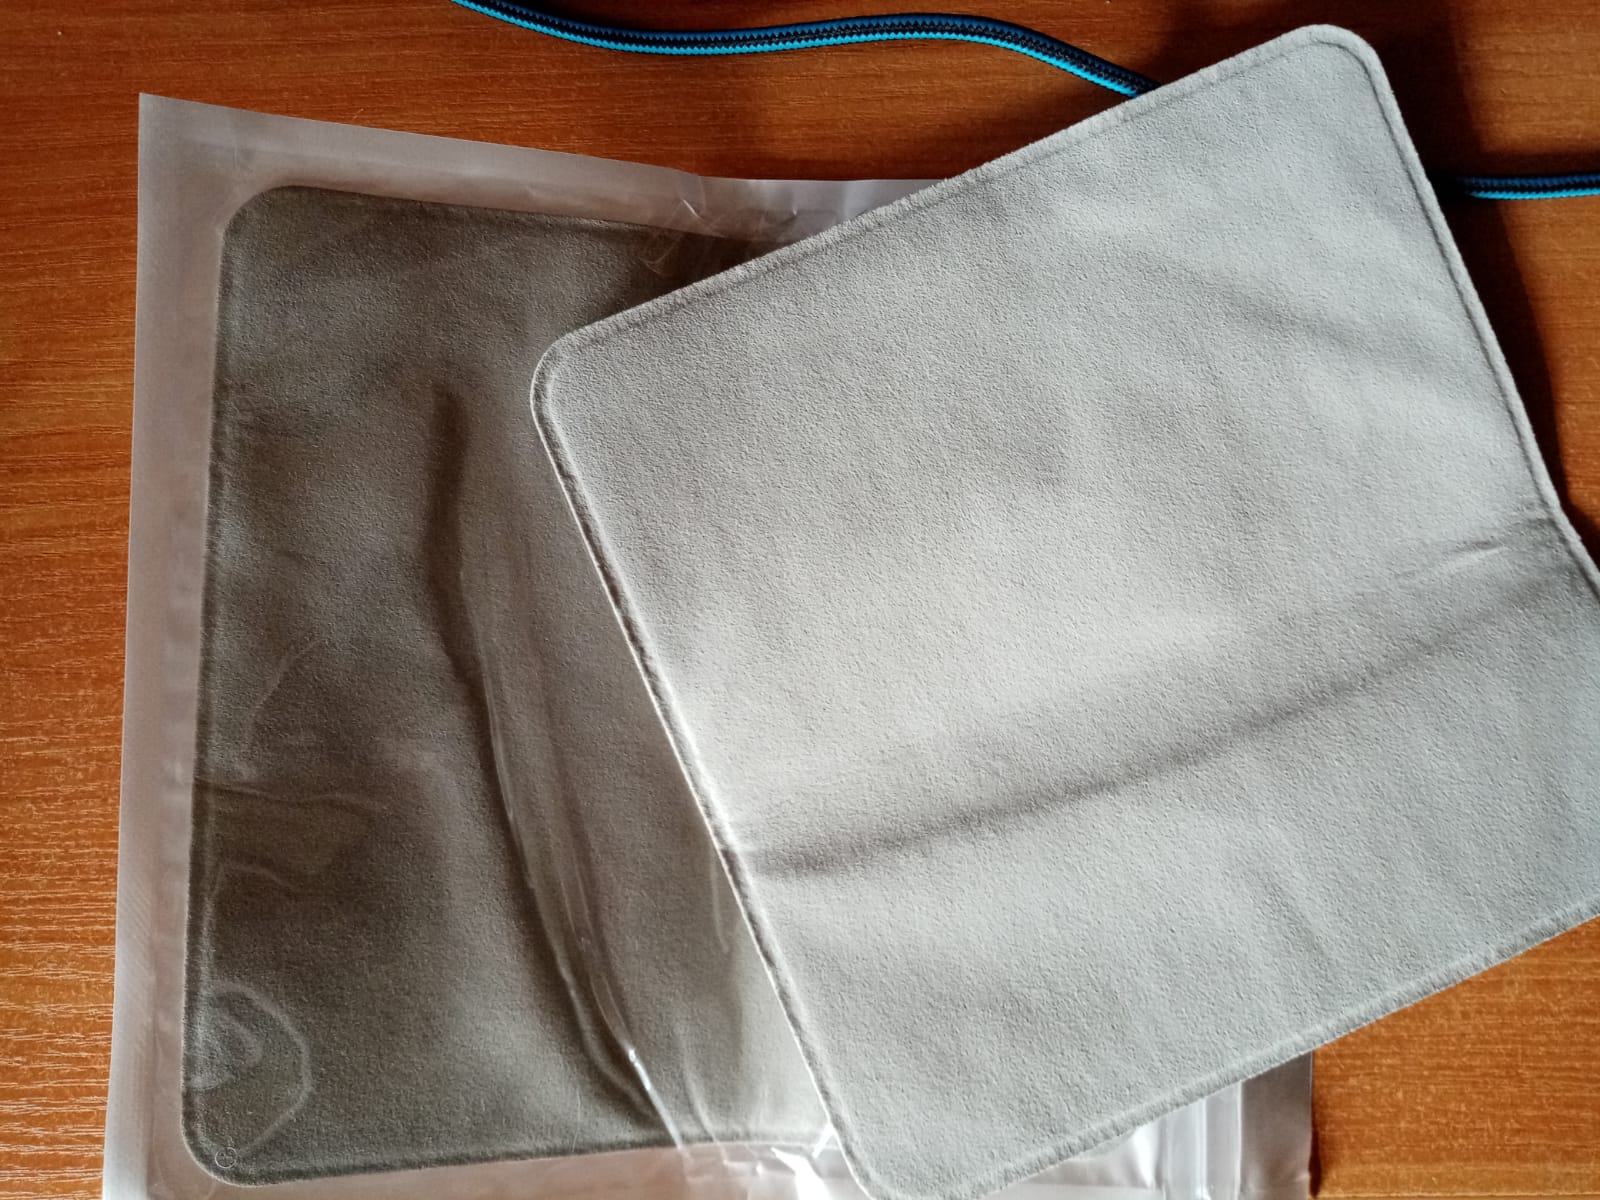 ScreenCleaning Polishing Cloth photo review